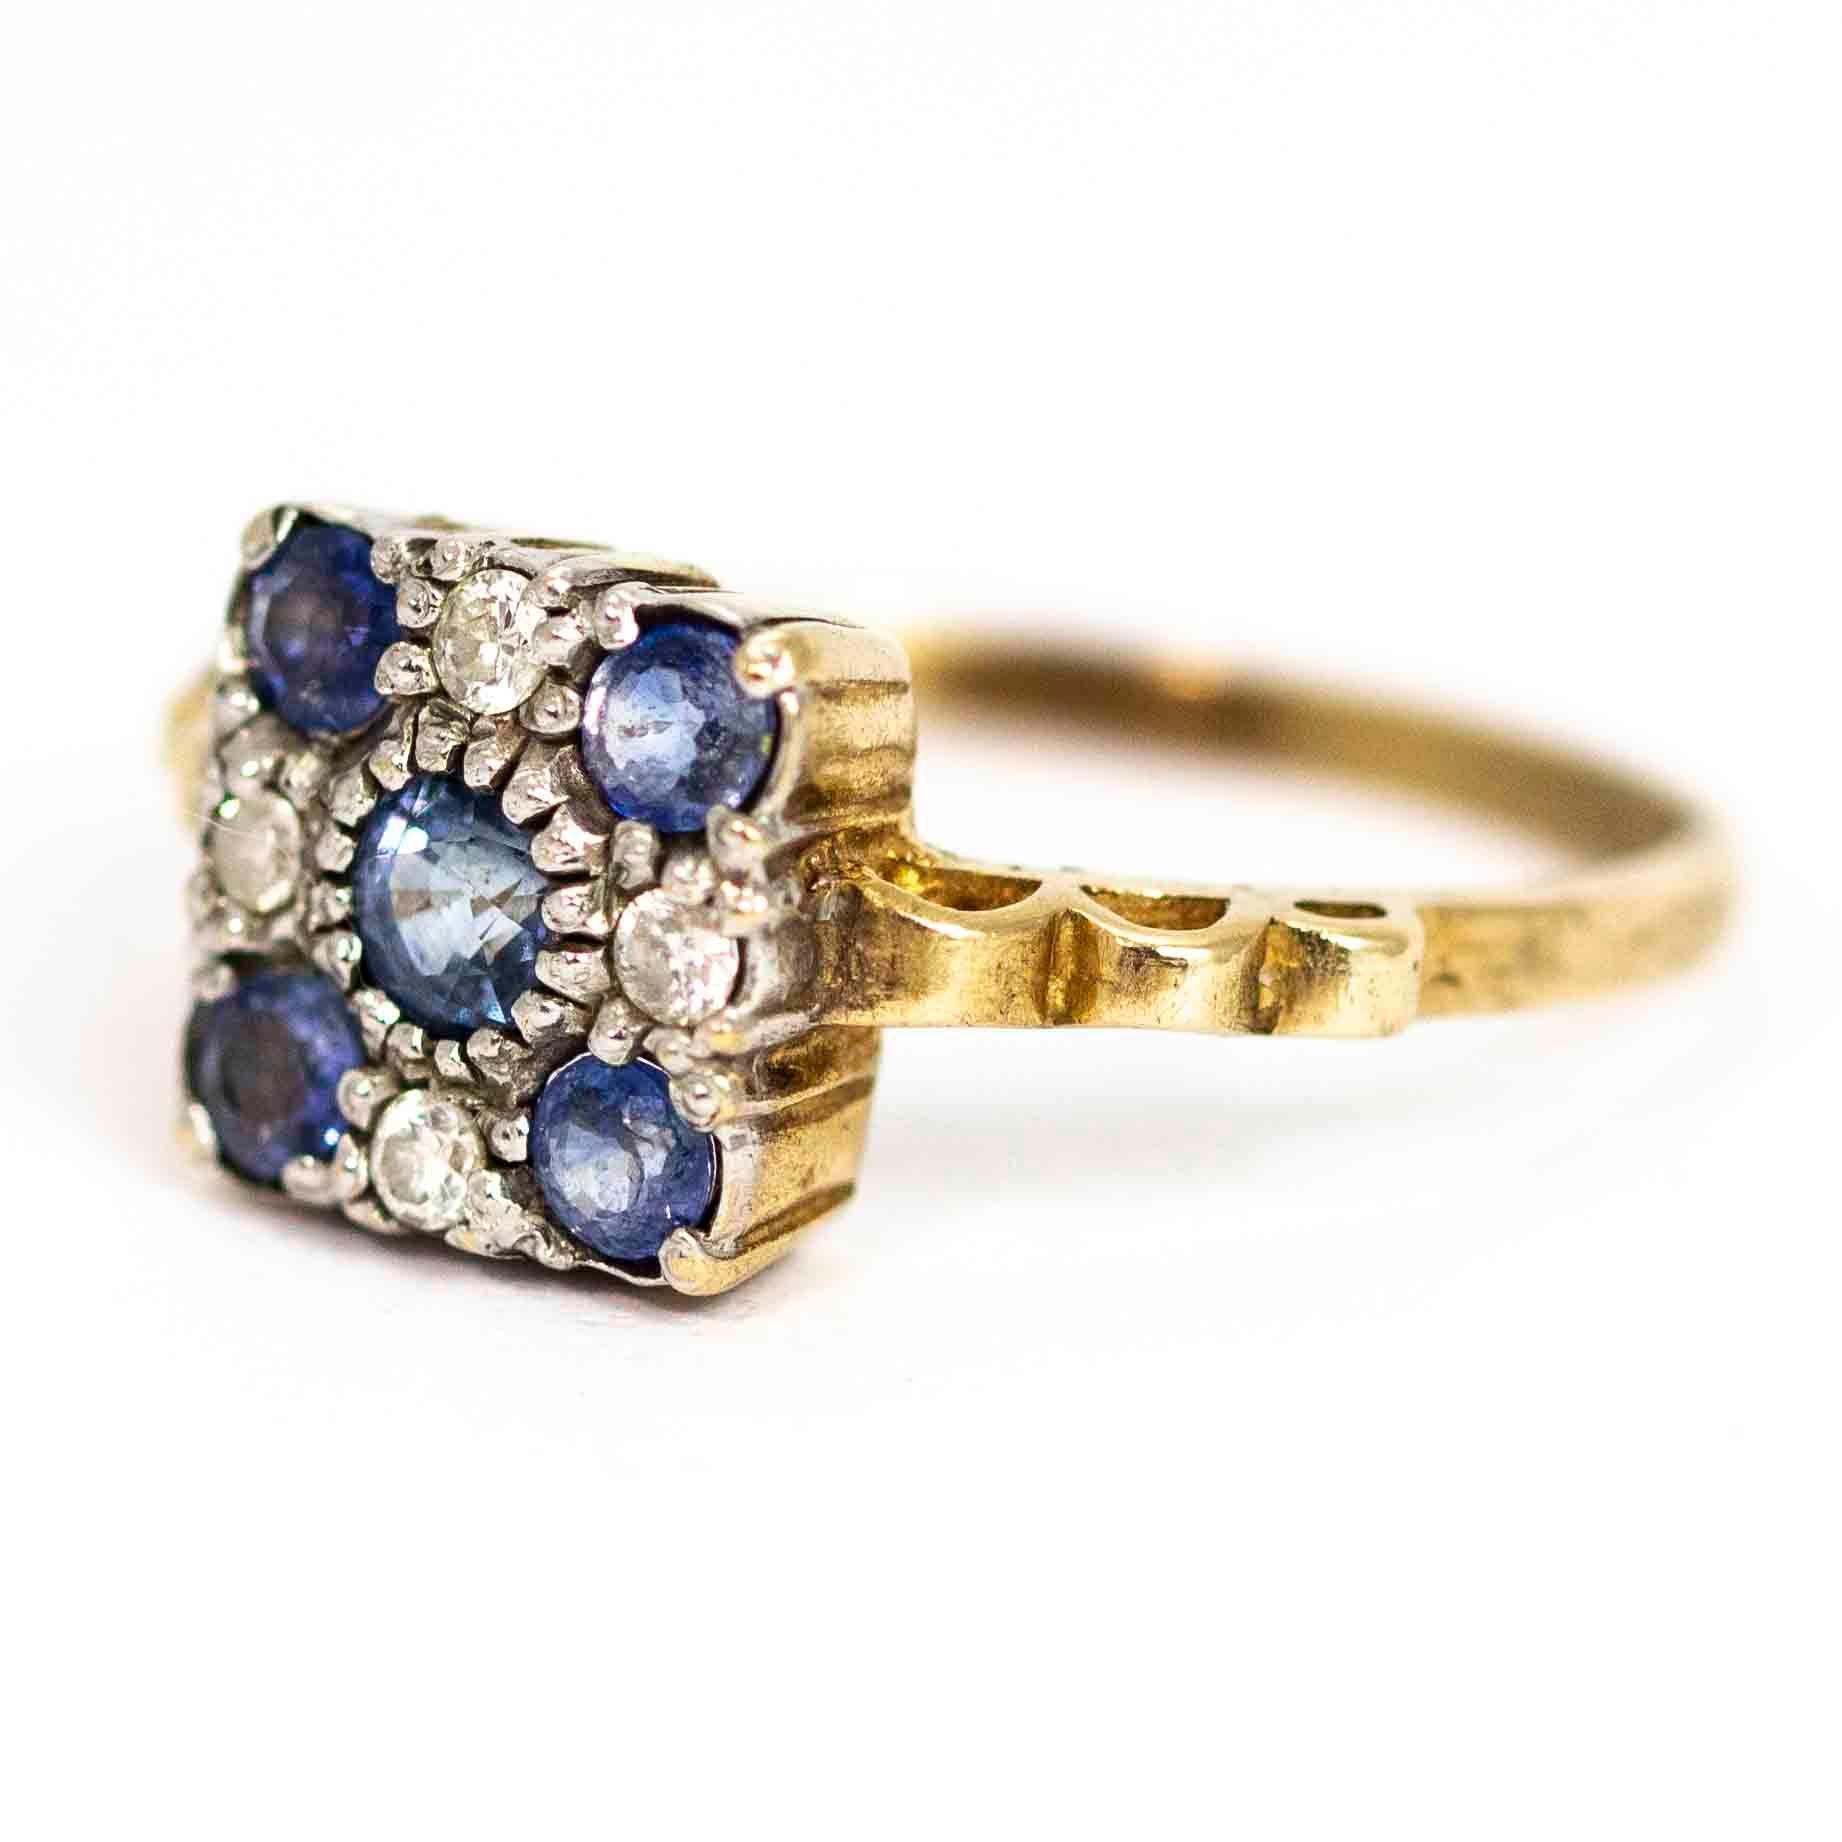 A superb vintage Art Deco ring with a square cluster of sapphire and diamonds. The beautiful central blue sapphire measures 20 points, the four corner sapphires each measure 10 points. The sapphires are spaced by fine 4 points diamonds. The cluster